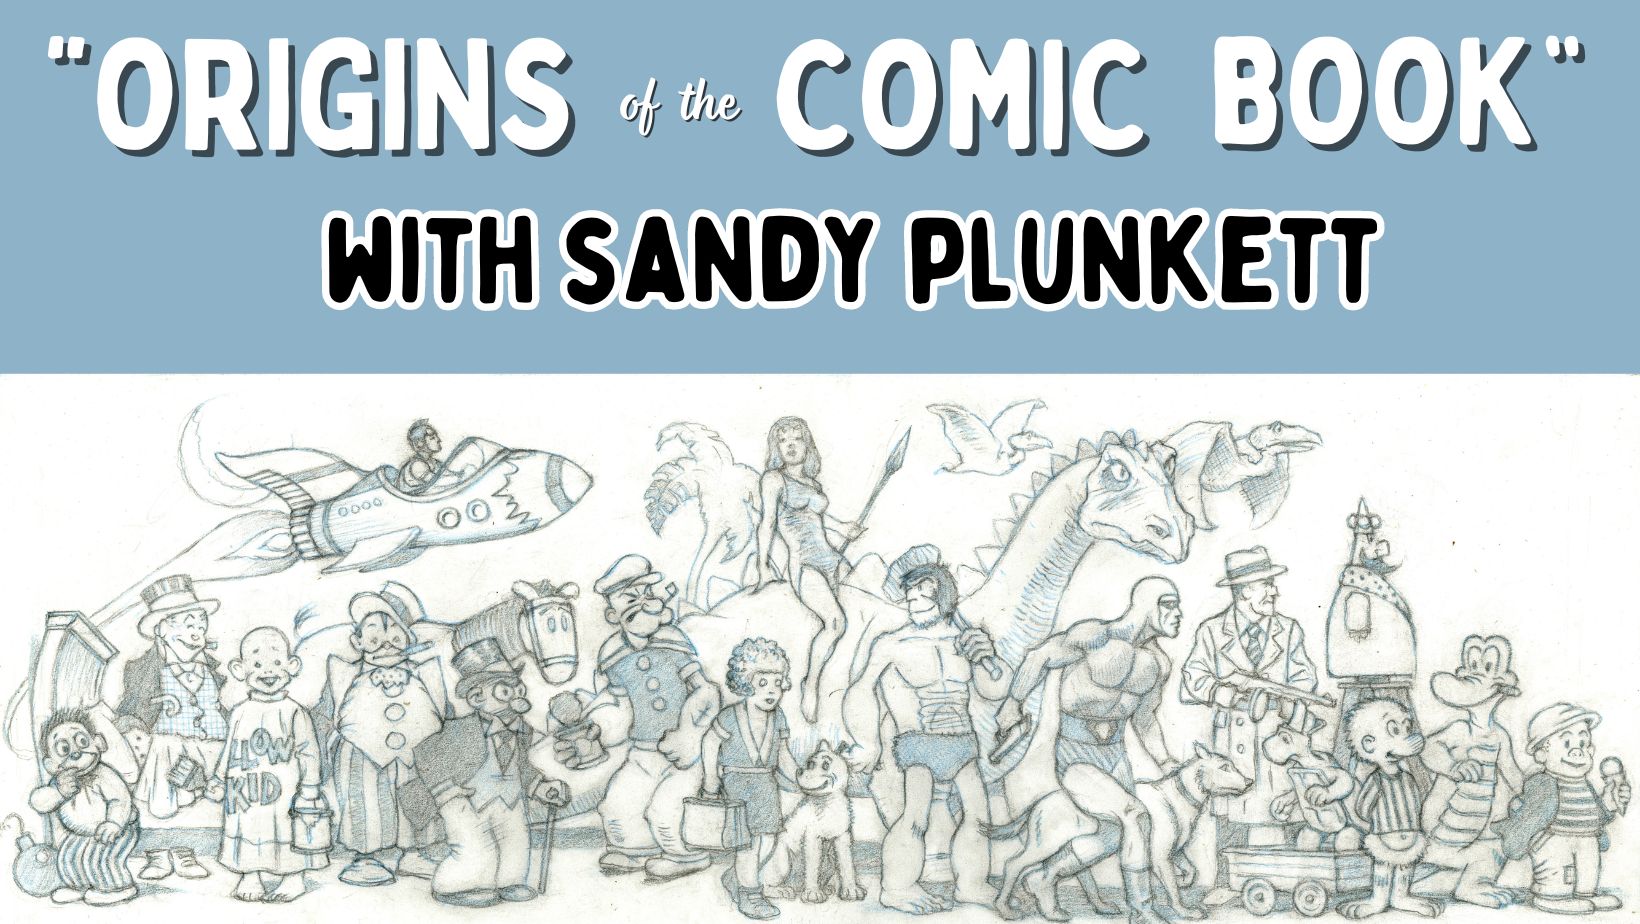 A flyer for the "origins of the comic book" presentation at the Southeast Ohio History Center